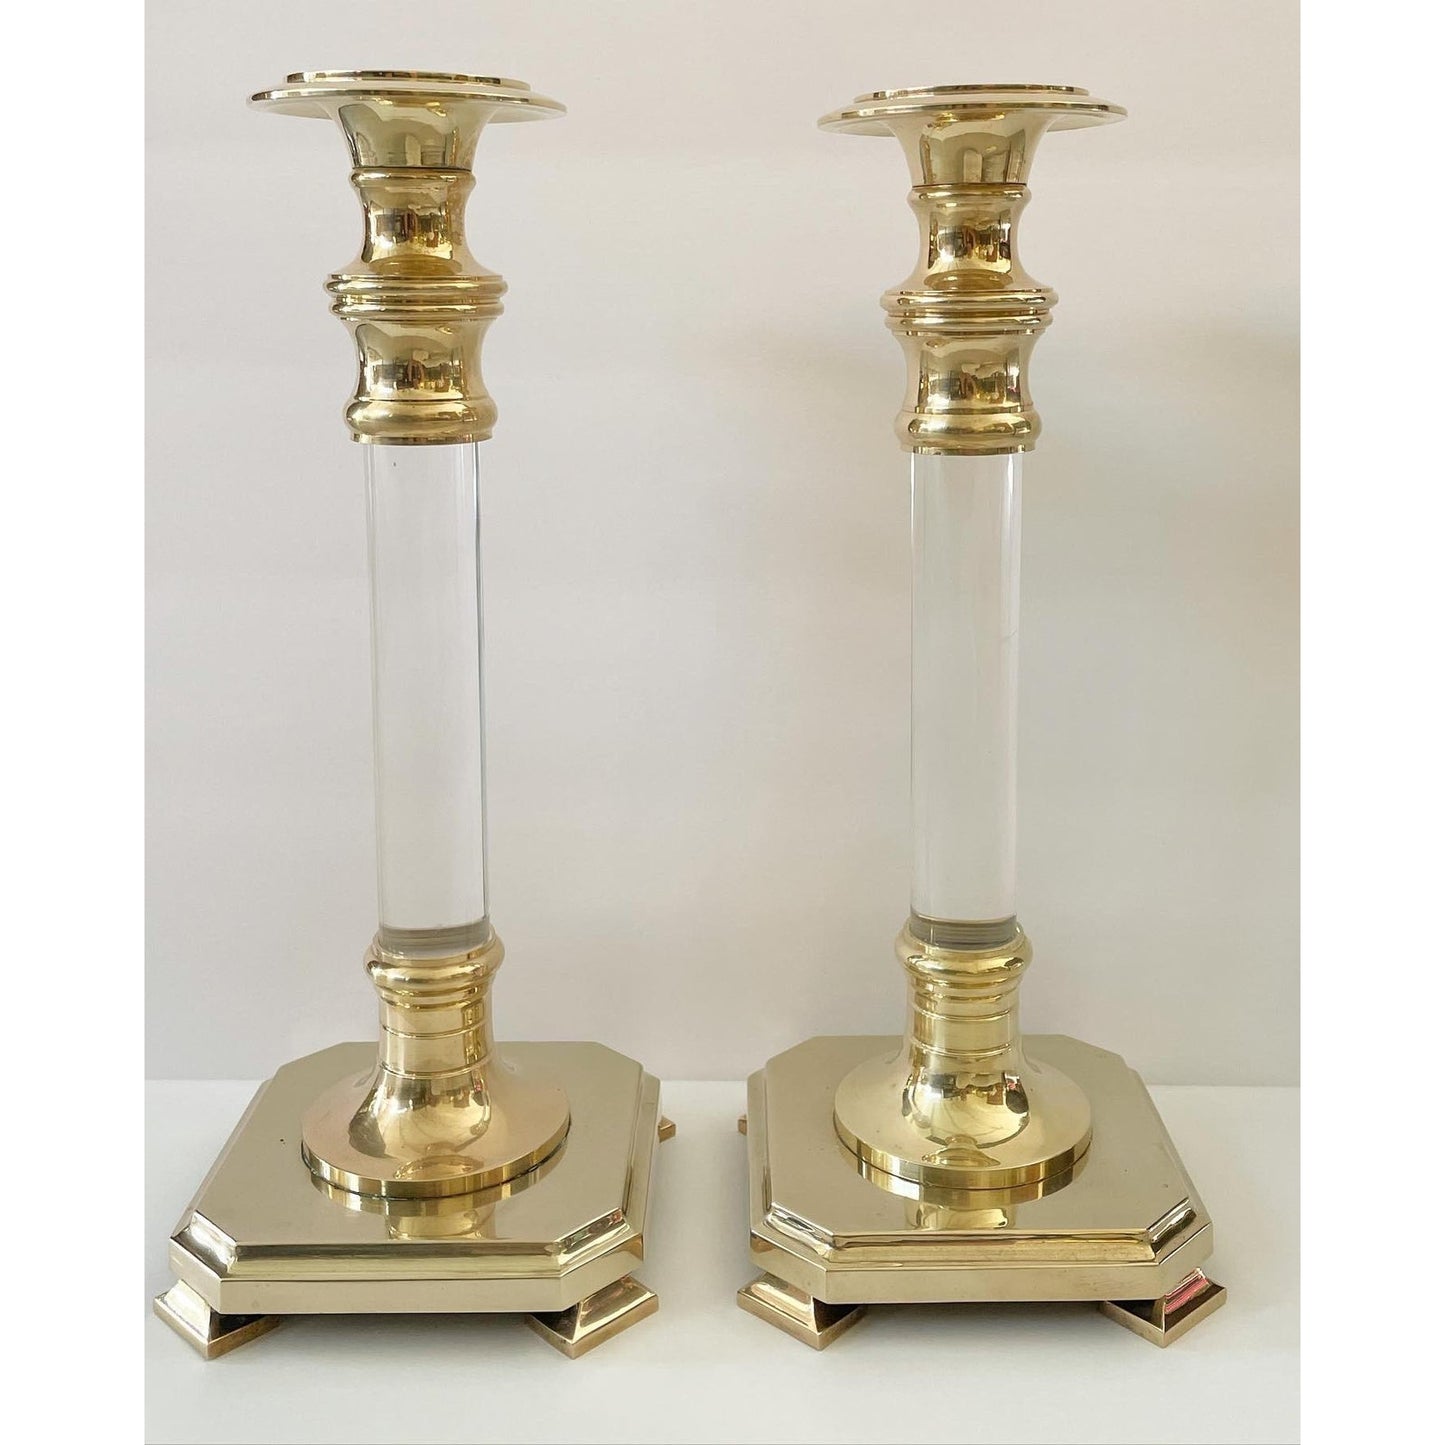 Fabulous Extra Large Lucite and Polished Brass Candlestick Holders on Footed Base